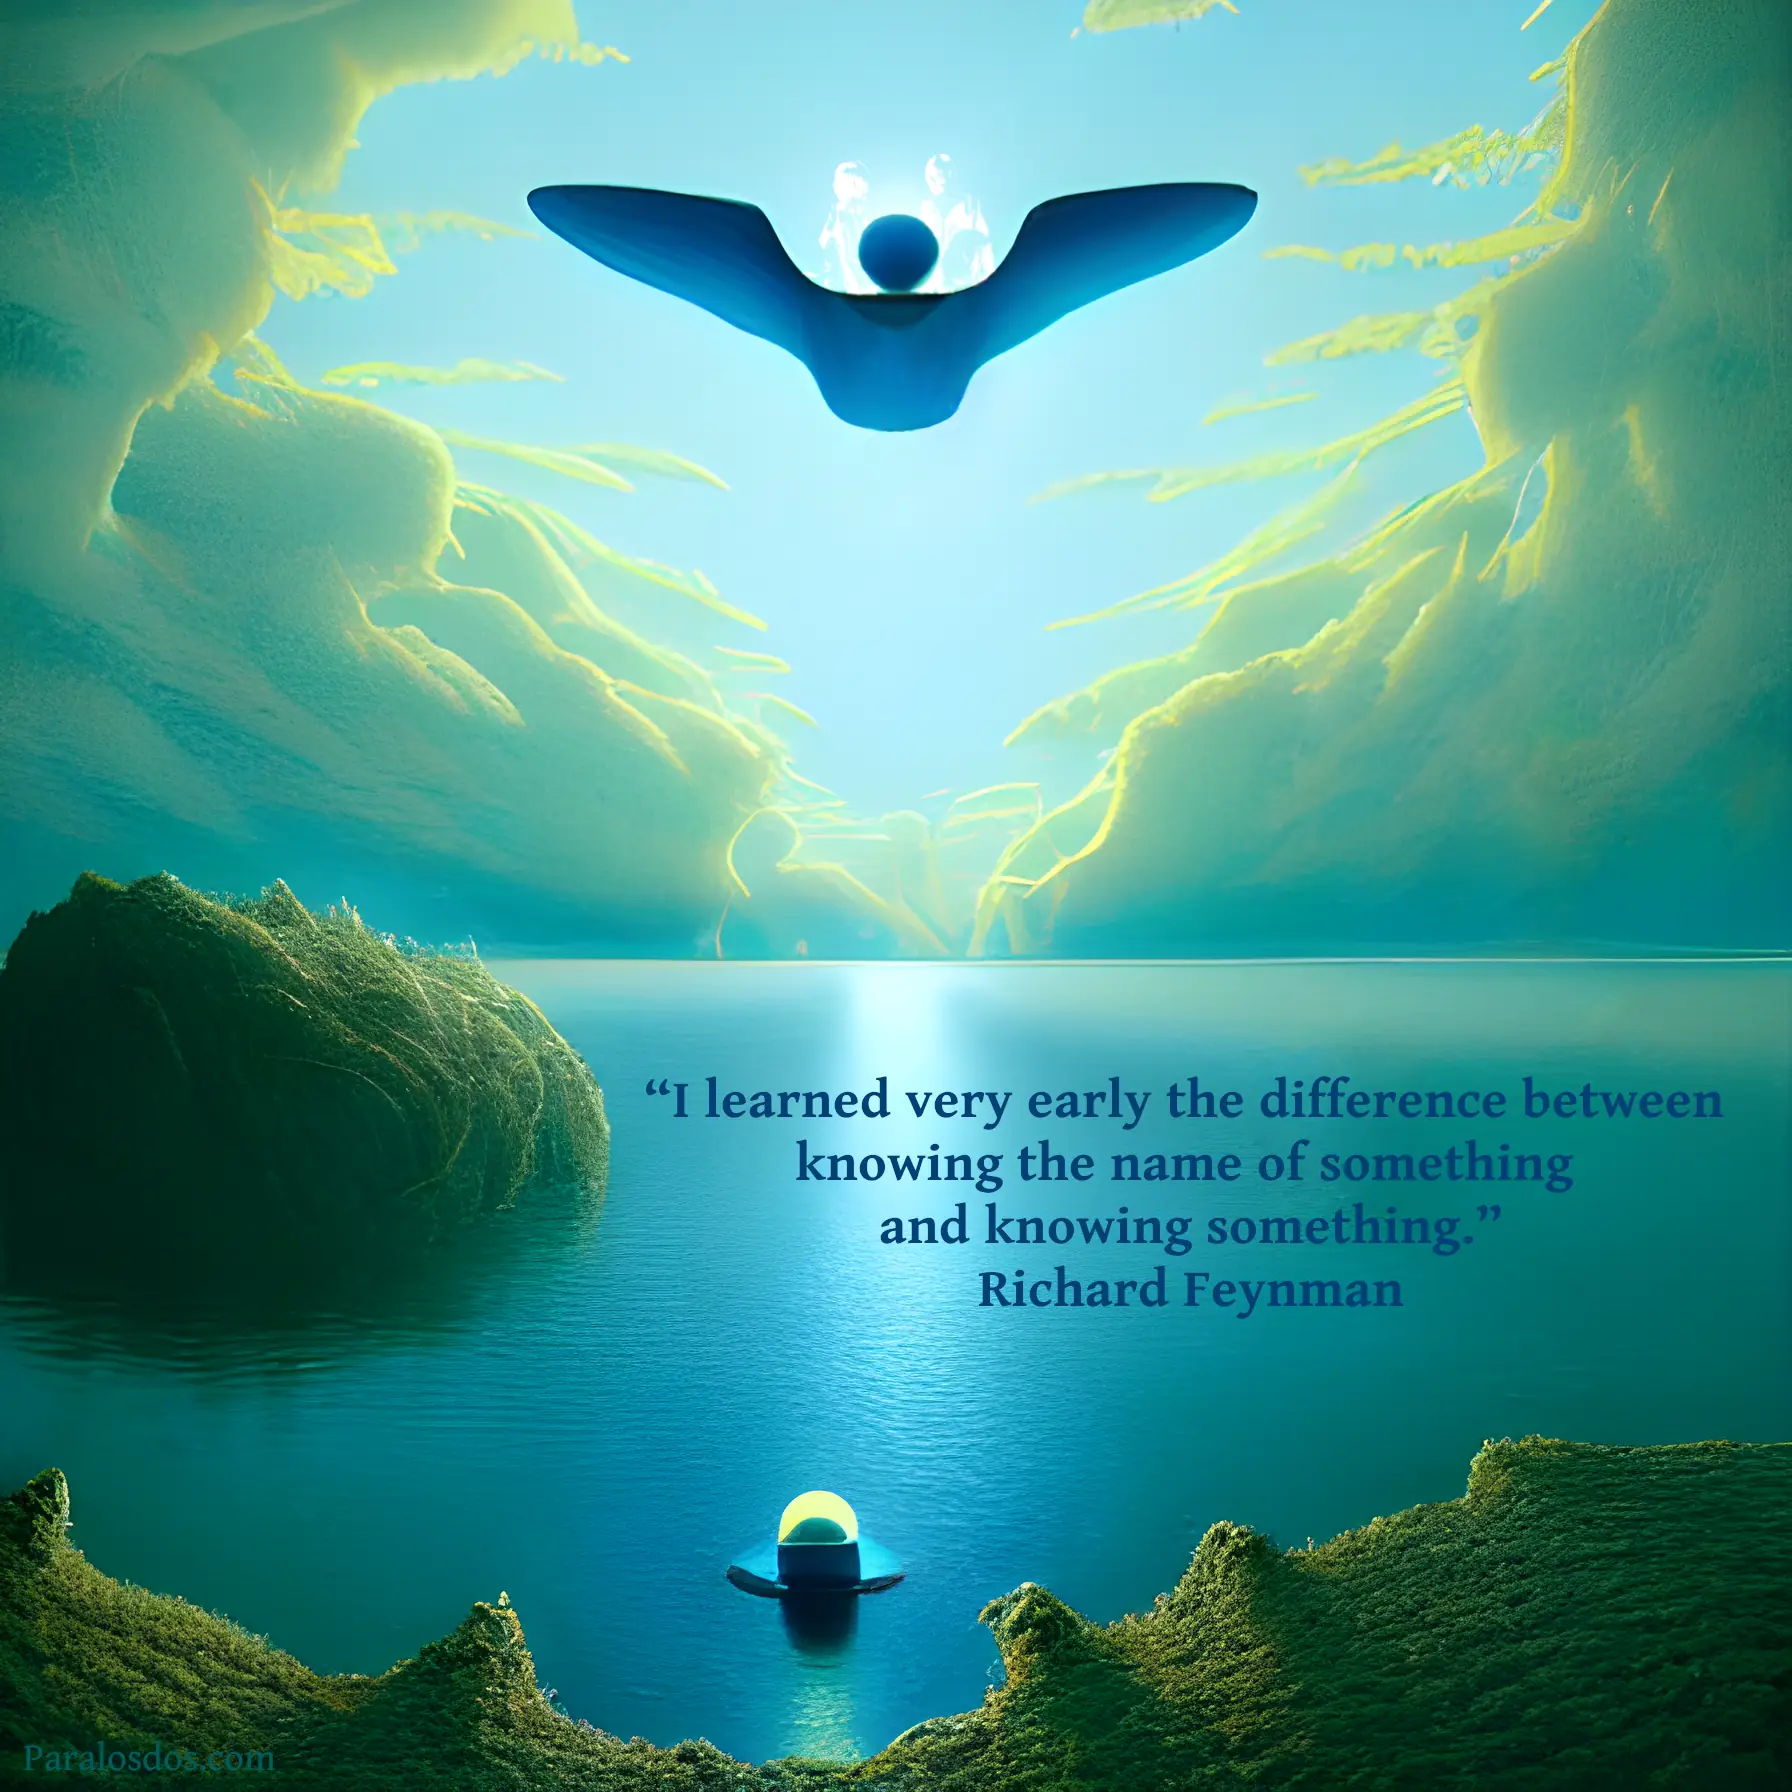 A fantastical artistic rendering of a creature flying above a lake. The quote reads: “I learned very early the difference between knowing the name of something and knowing something.” Richard Feynman